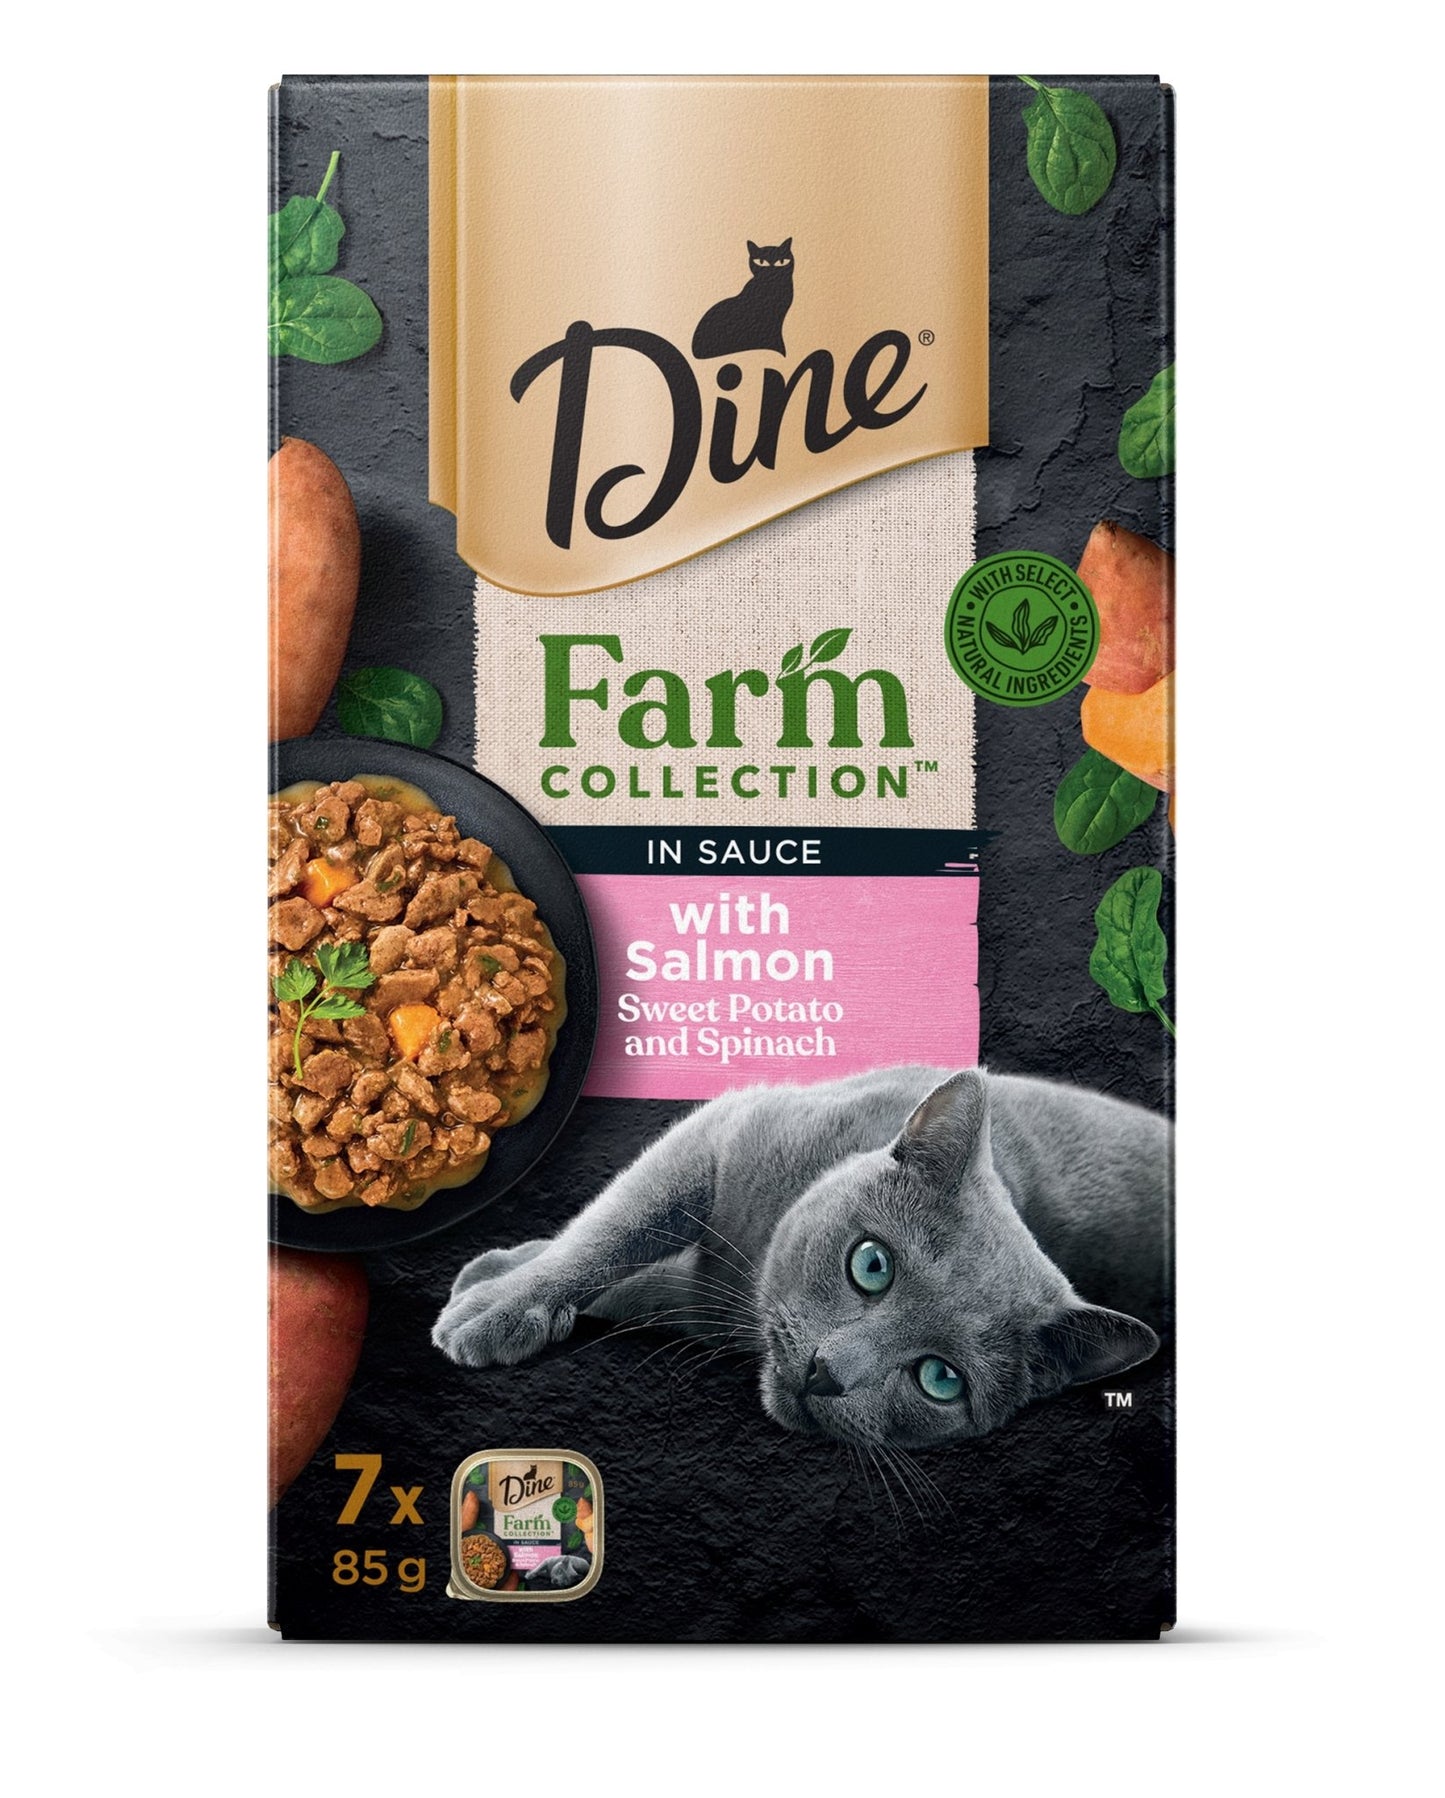 Dine Farm Collection with Salmon Sweet Potato and Spinach 7x85g - Woonona Petfood & Produce